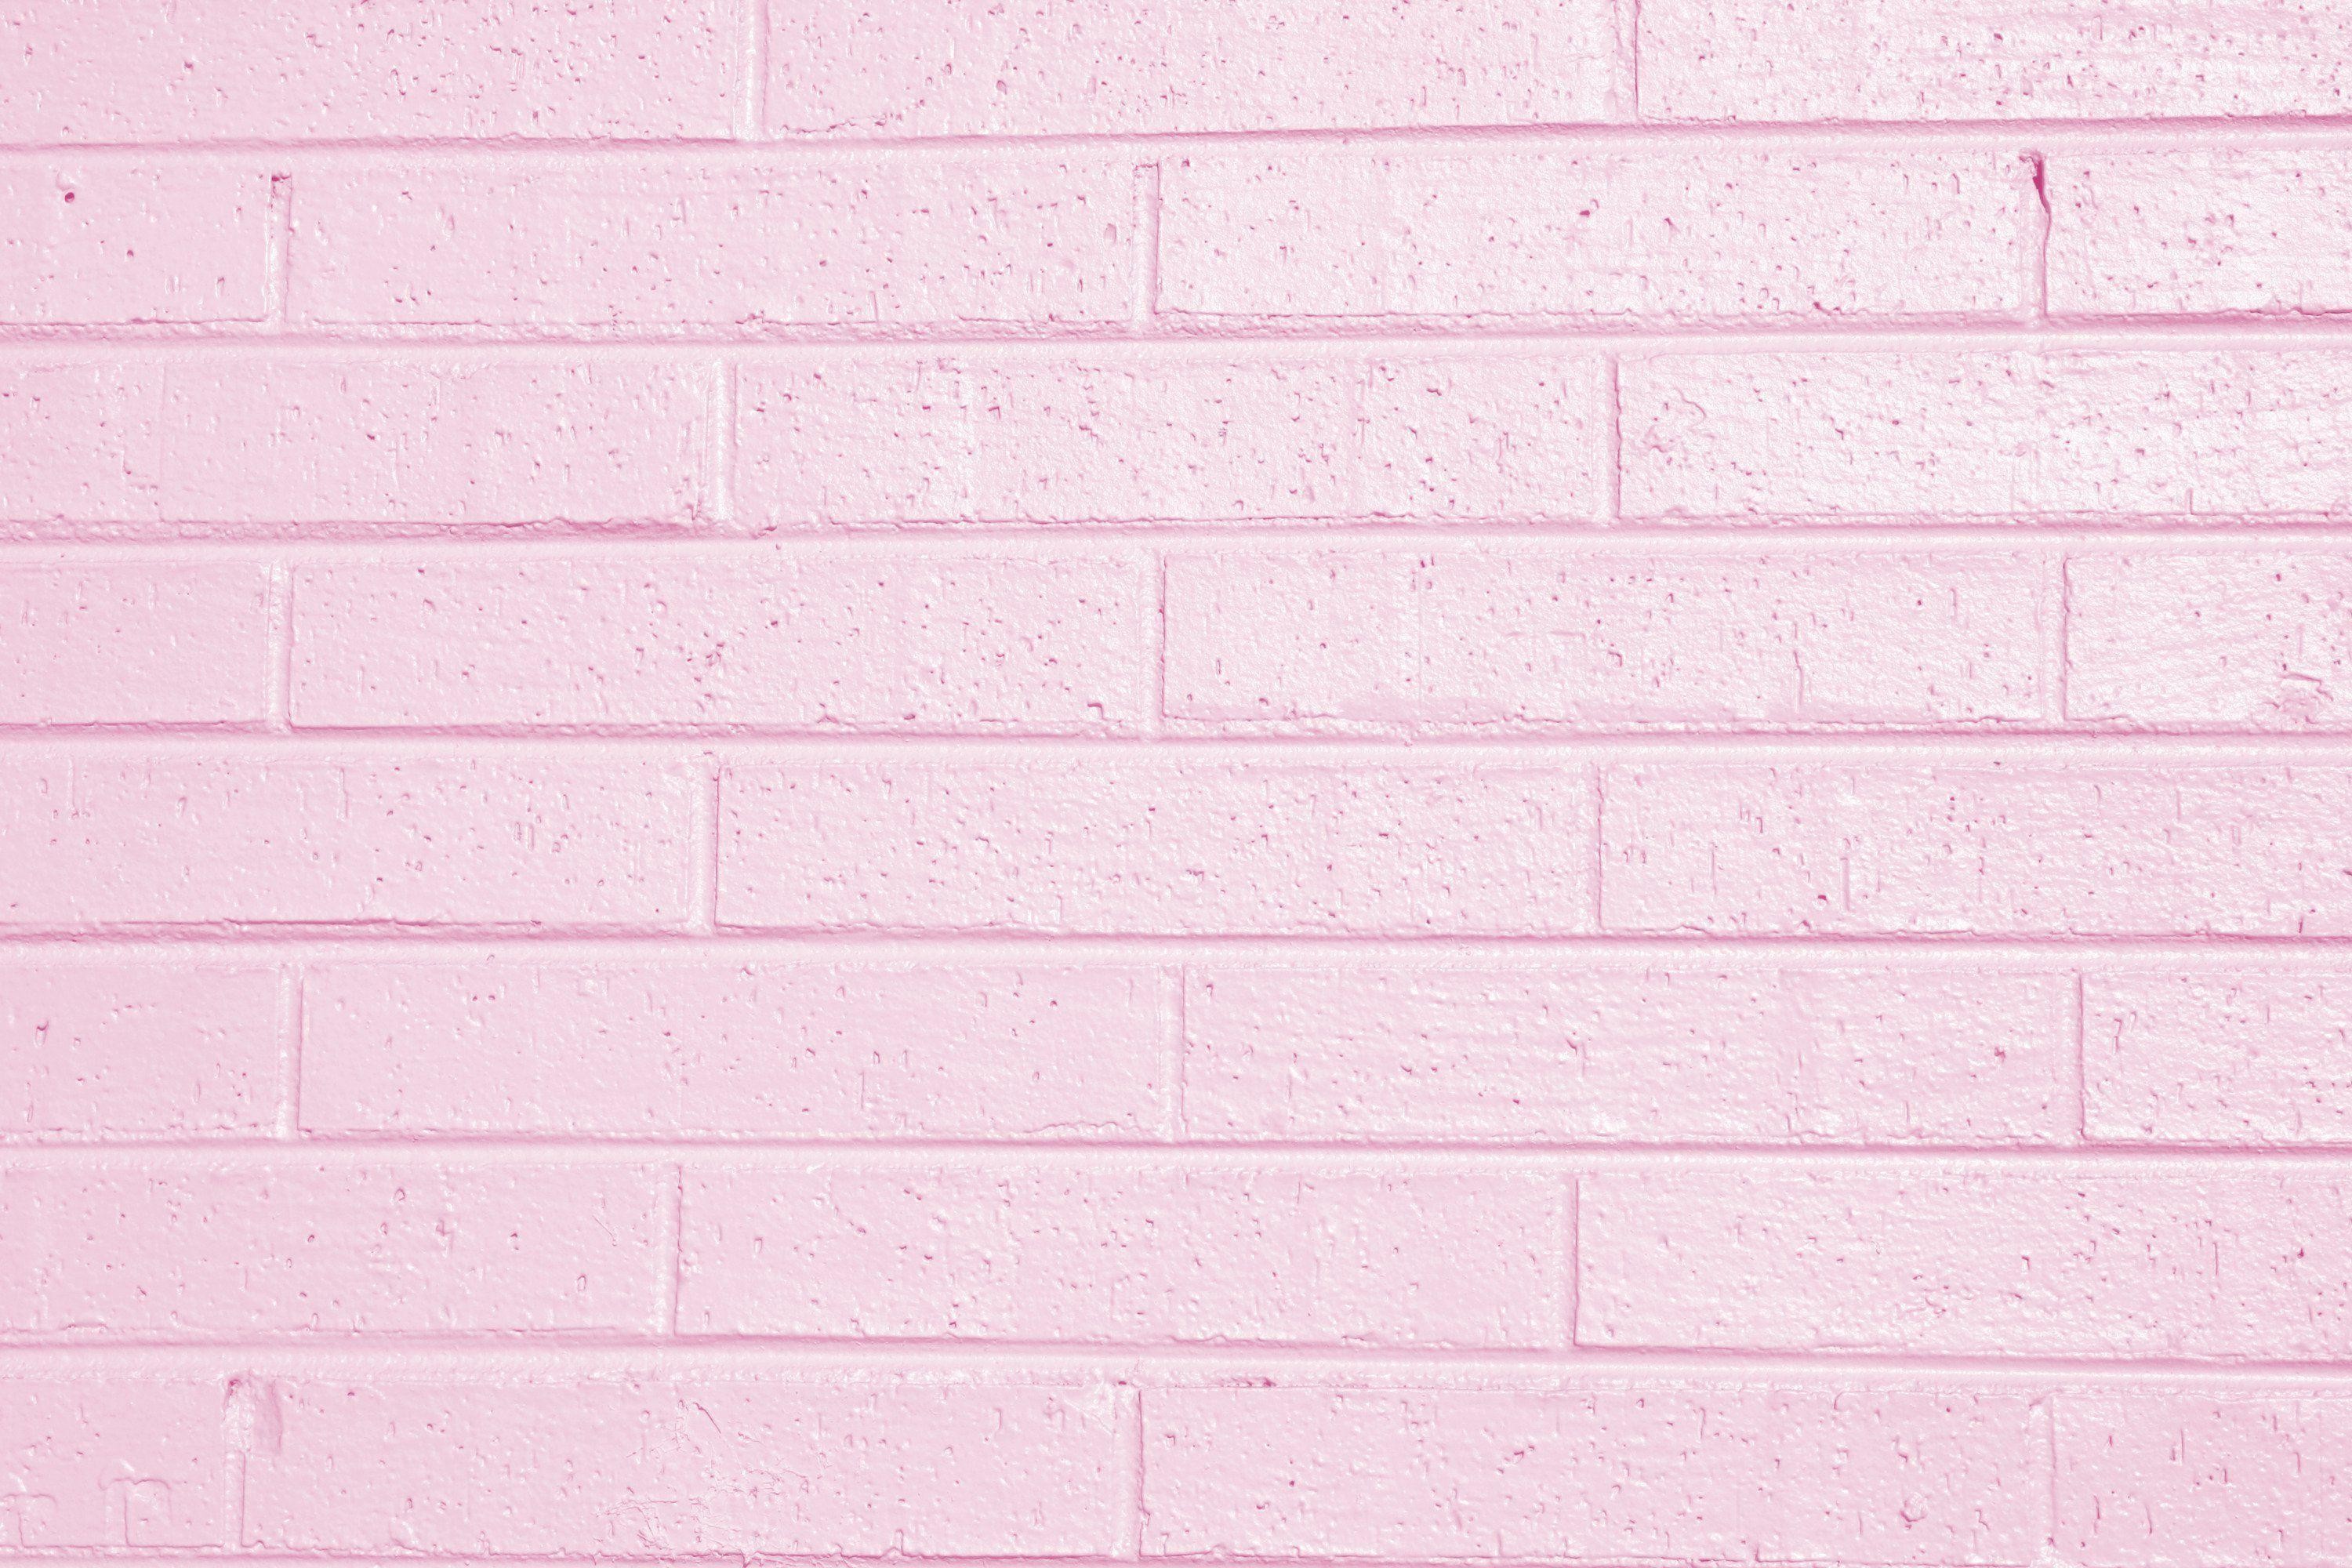 Pink Aesthetic Wallpaper for iPhone  47 Gorgeous  Cute Backgrounds